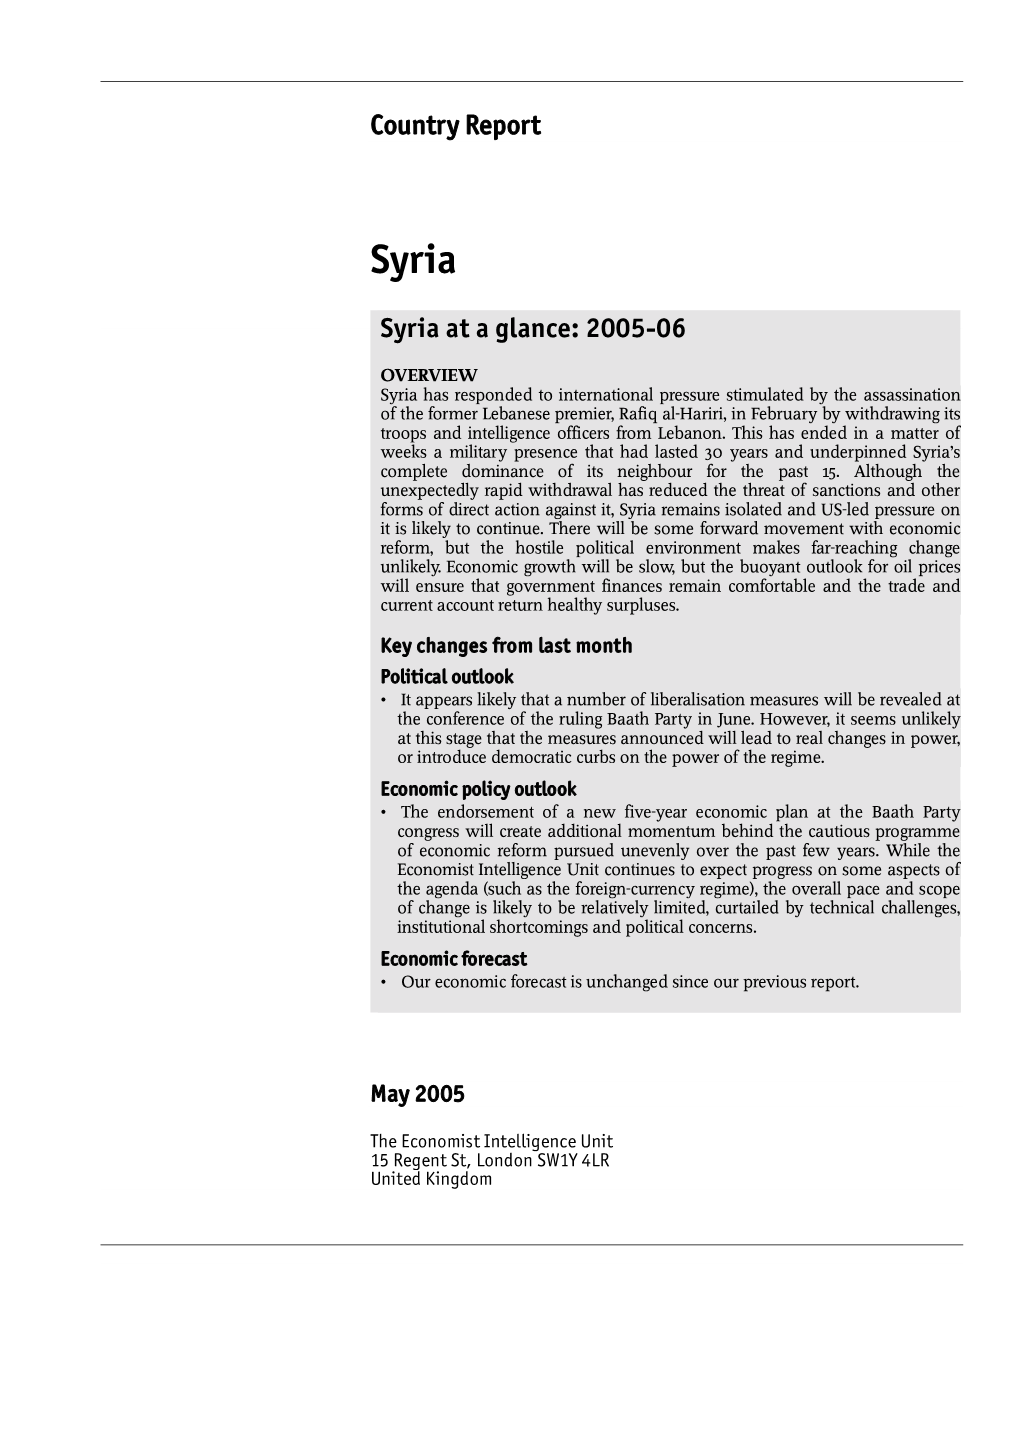 Country Report Syria at a Glance: 2005-06